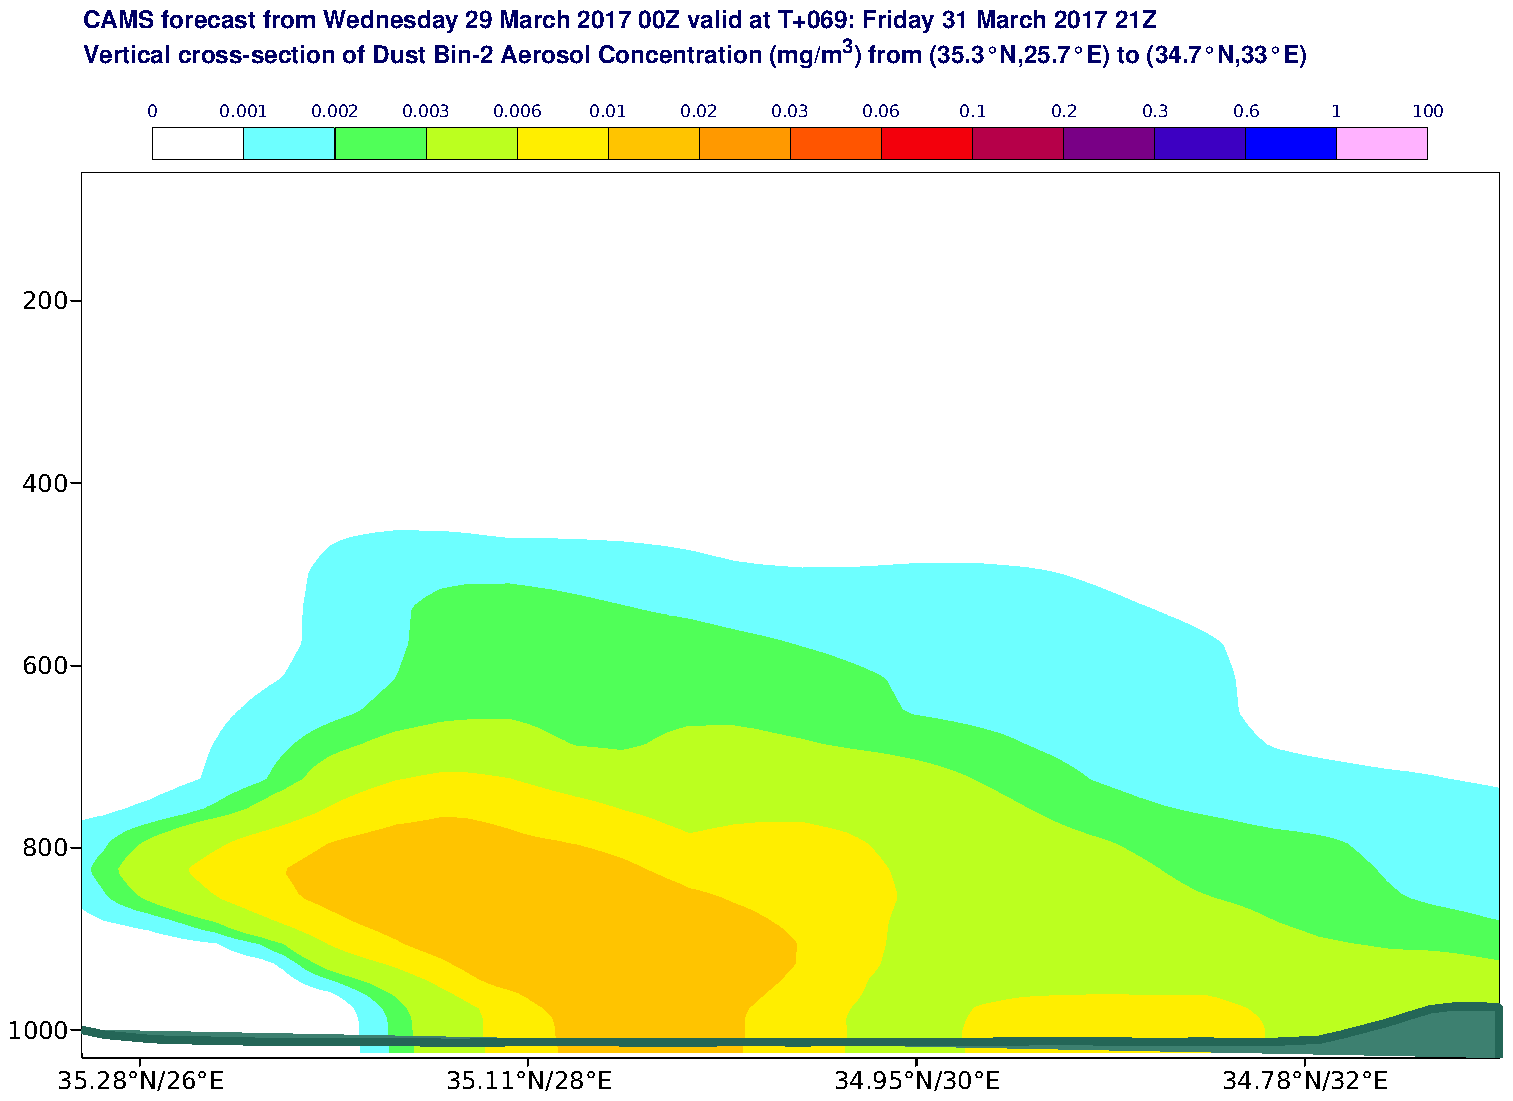 Vertical cross-section of Dust Bin-2 Aerosol Concentration (mg/m3) valid at T69 - 2017-03-31 21:00